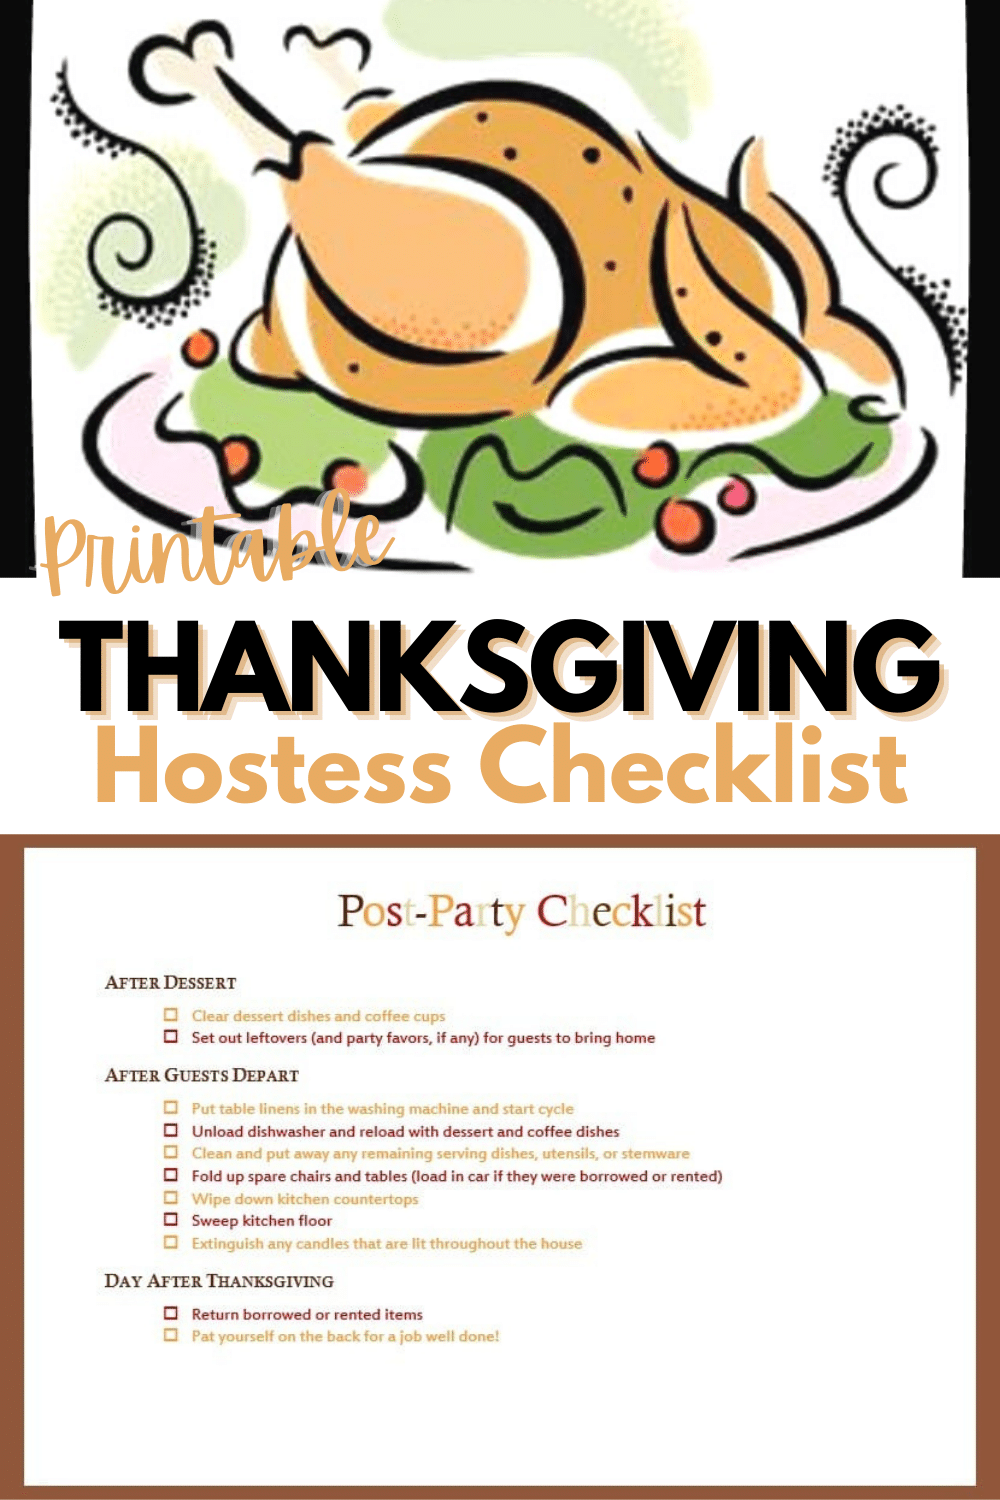 top image is a graphic of a Thanksgiving dinner, bottom image is a printable Thanksgiving Checklist